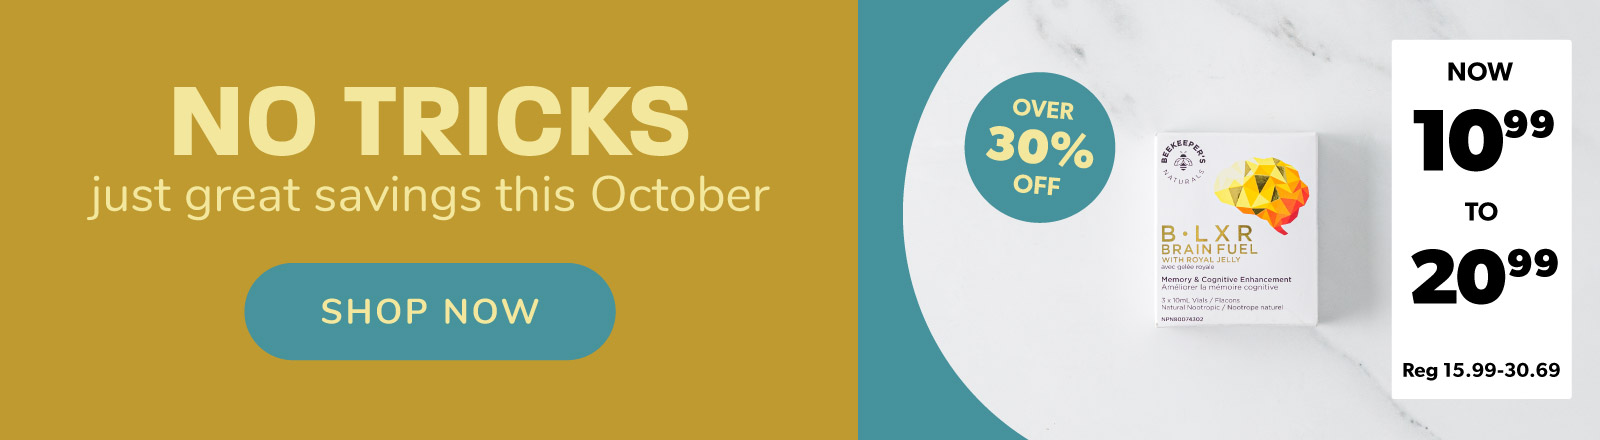 No Tricks just great savings this October on Beekeepers Natural Products